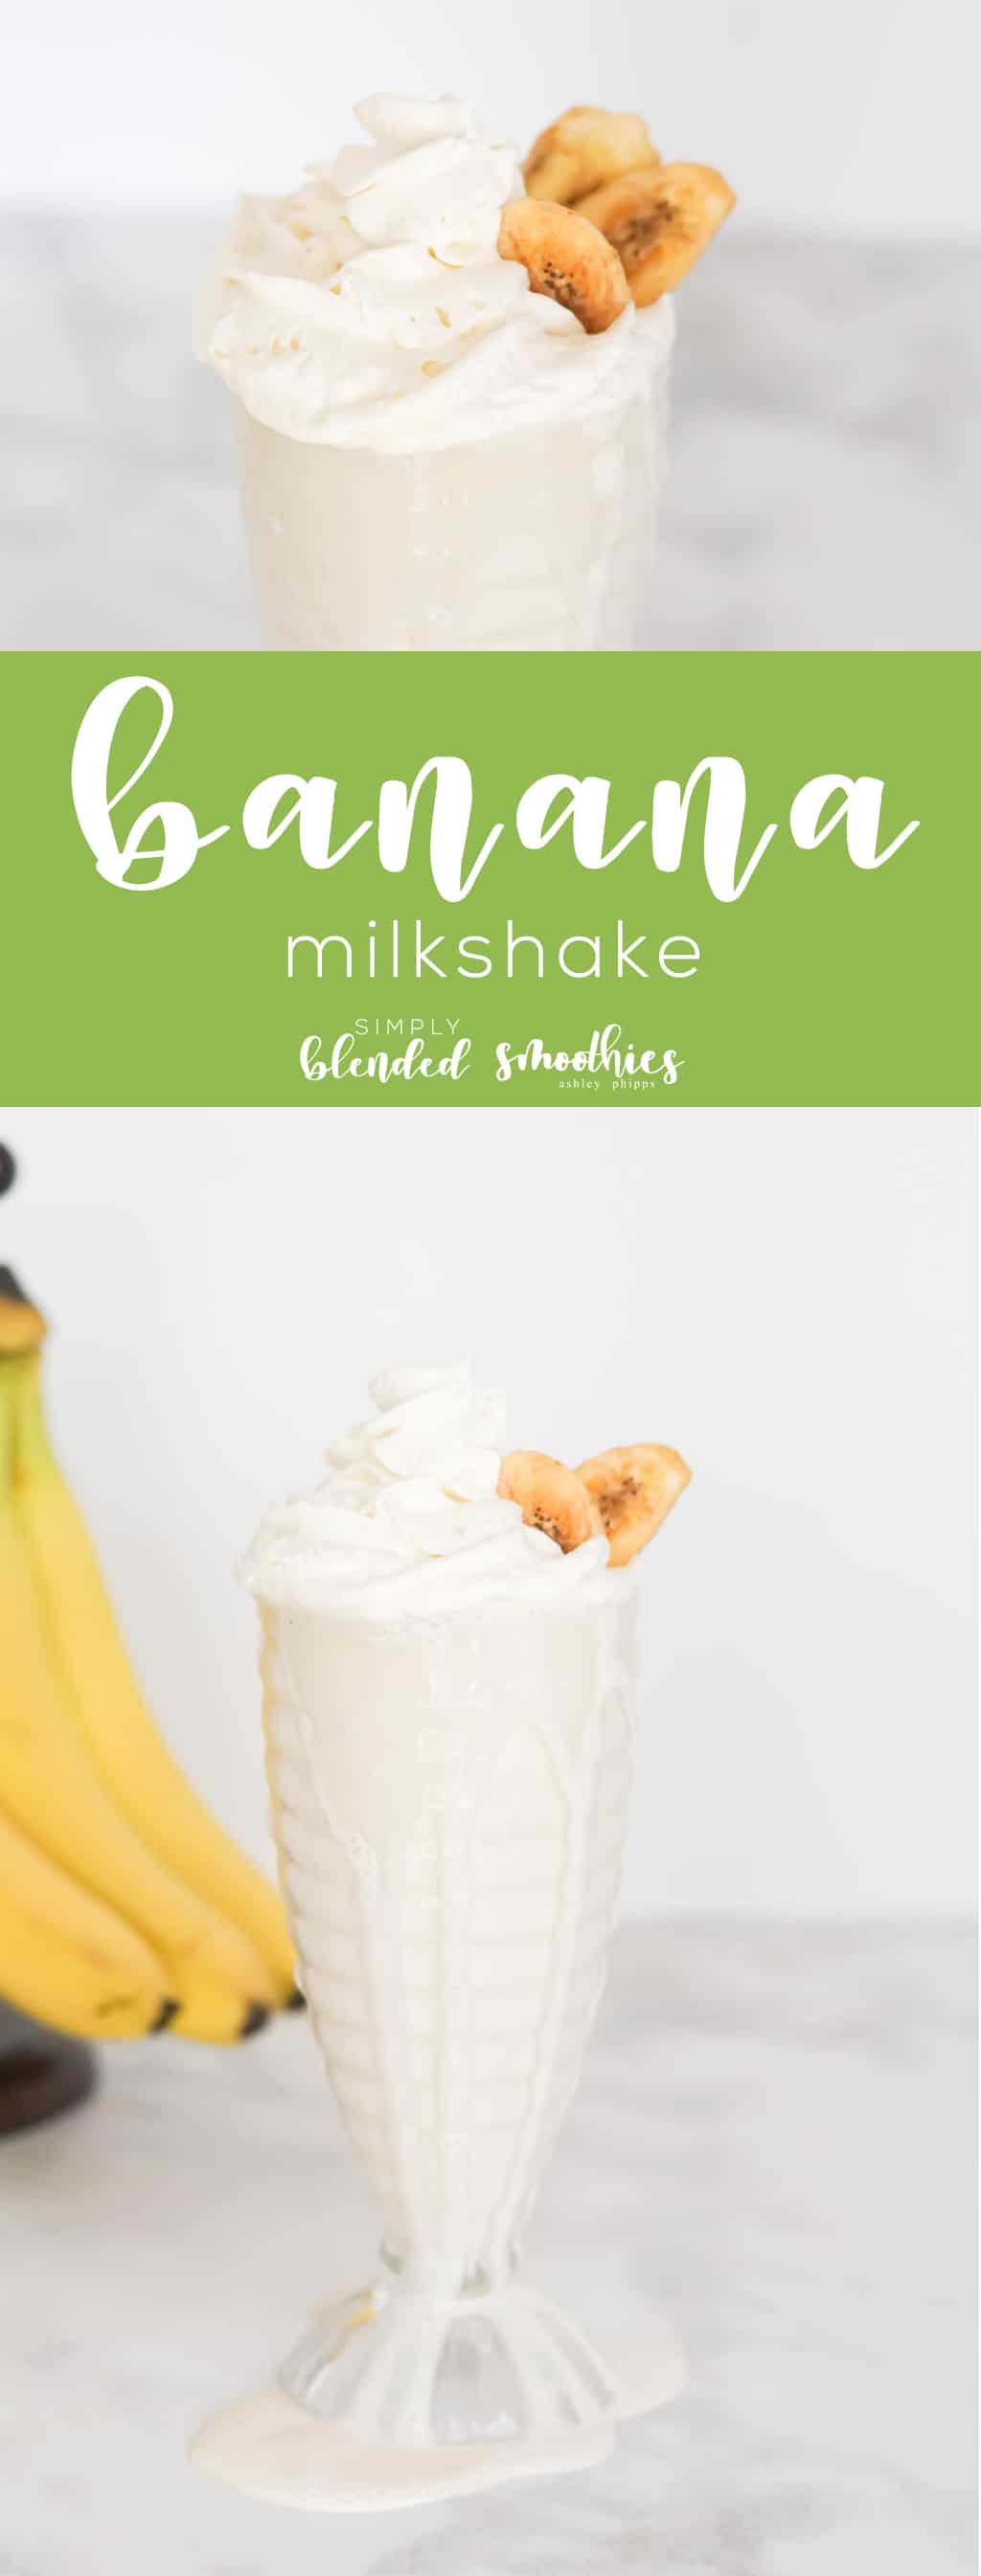 This Delicious Banana Milkshake Is Super Simple To Make Is So Delicious And It Only Takes A Few Ingredients To Make Yourself